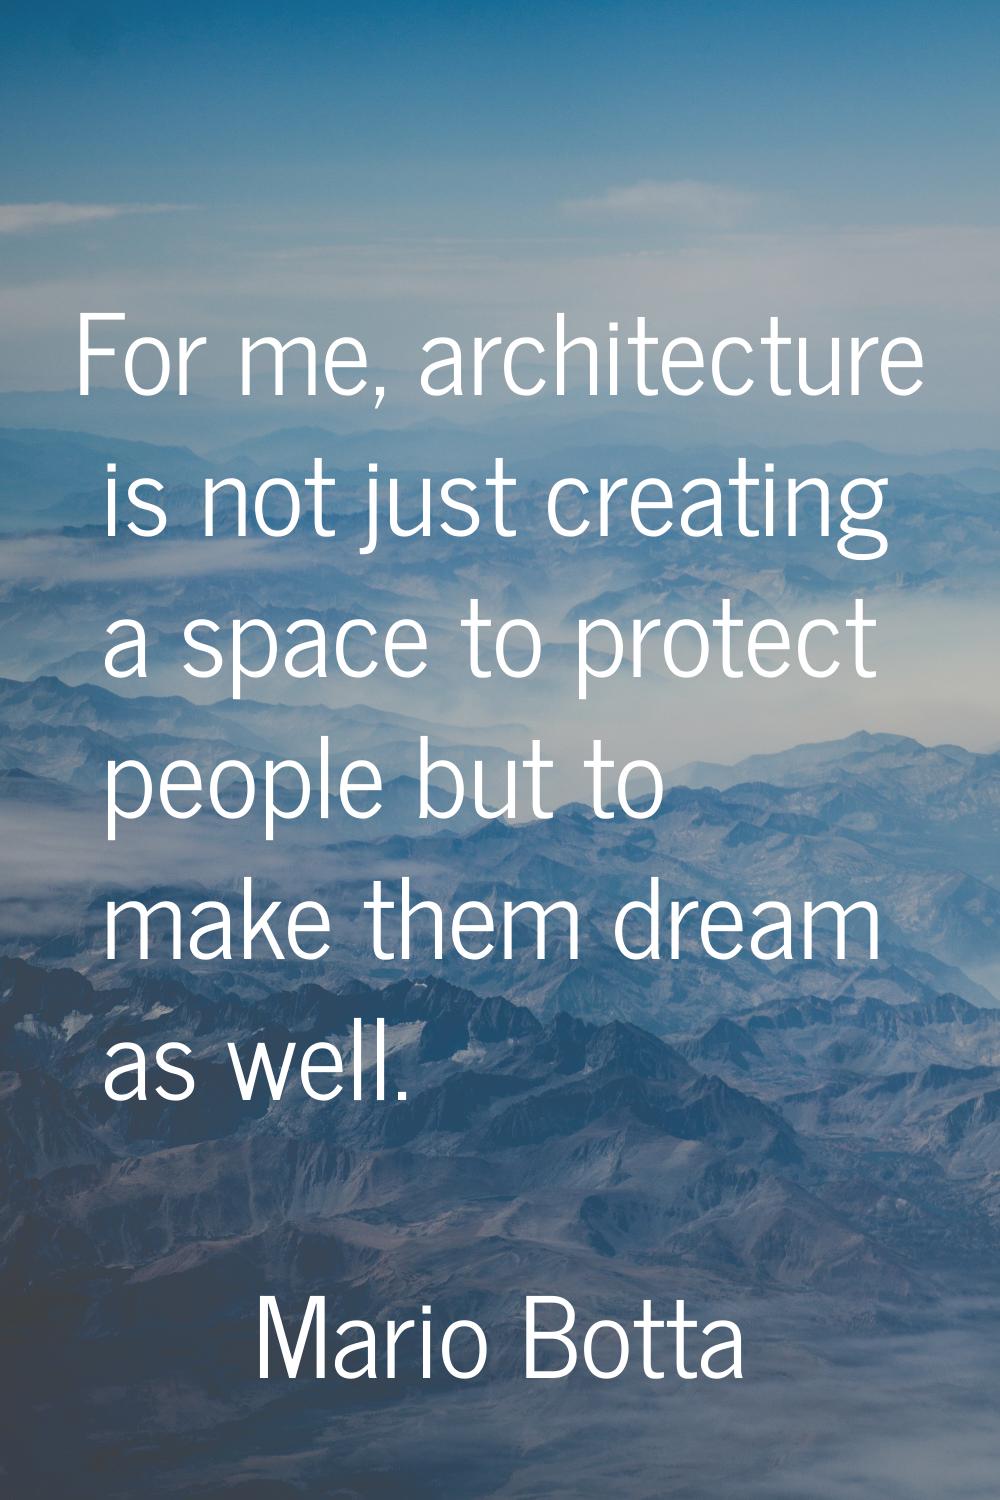 For me, architecture is not just creating a space to protect people but to make them dream as well.